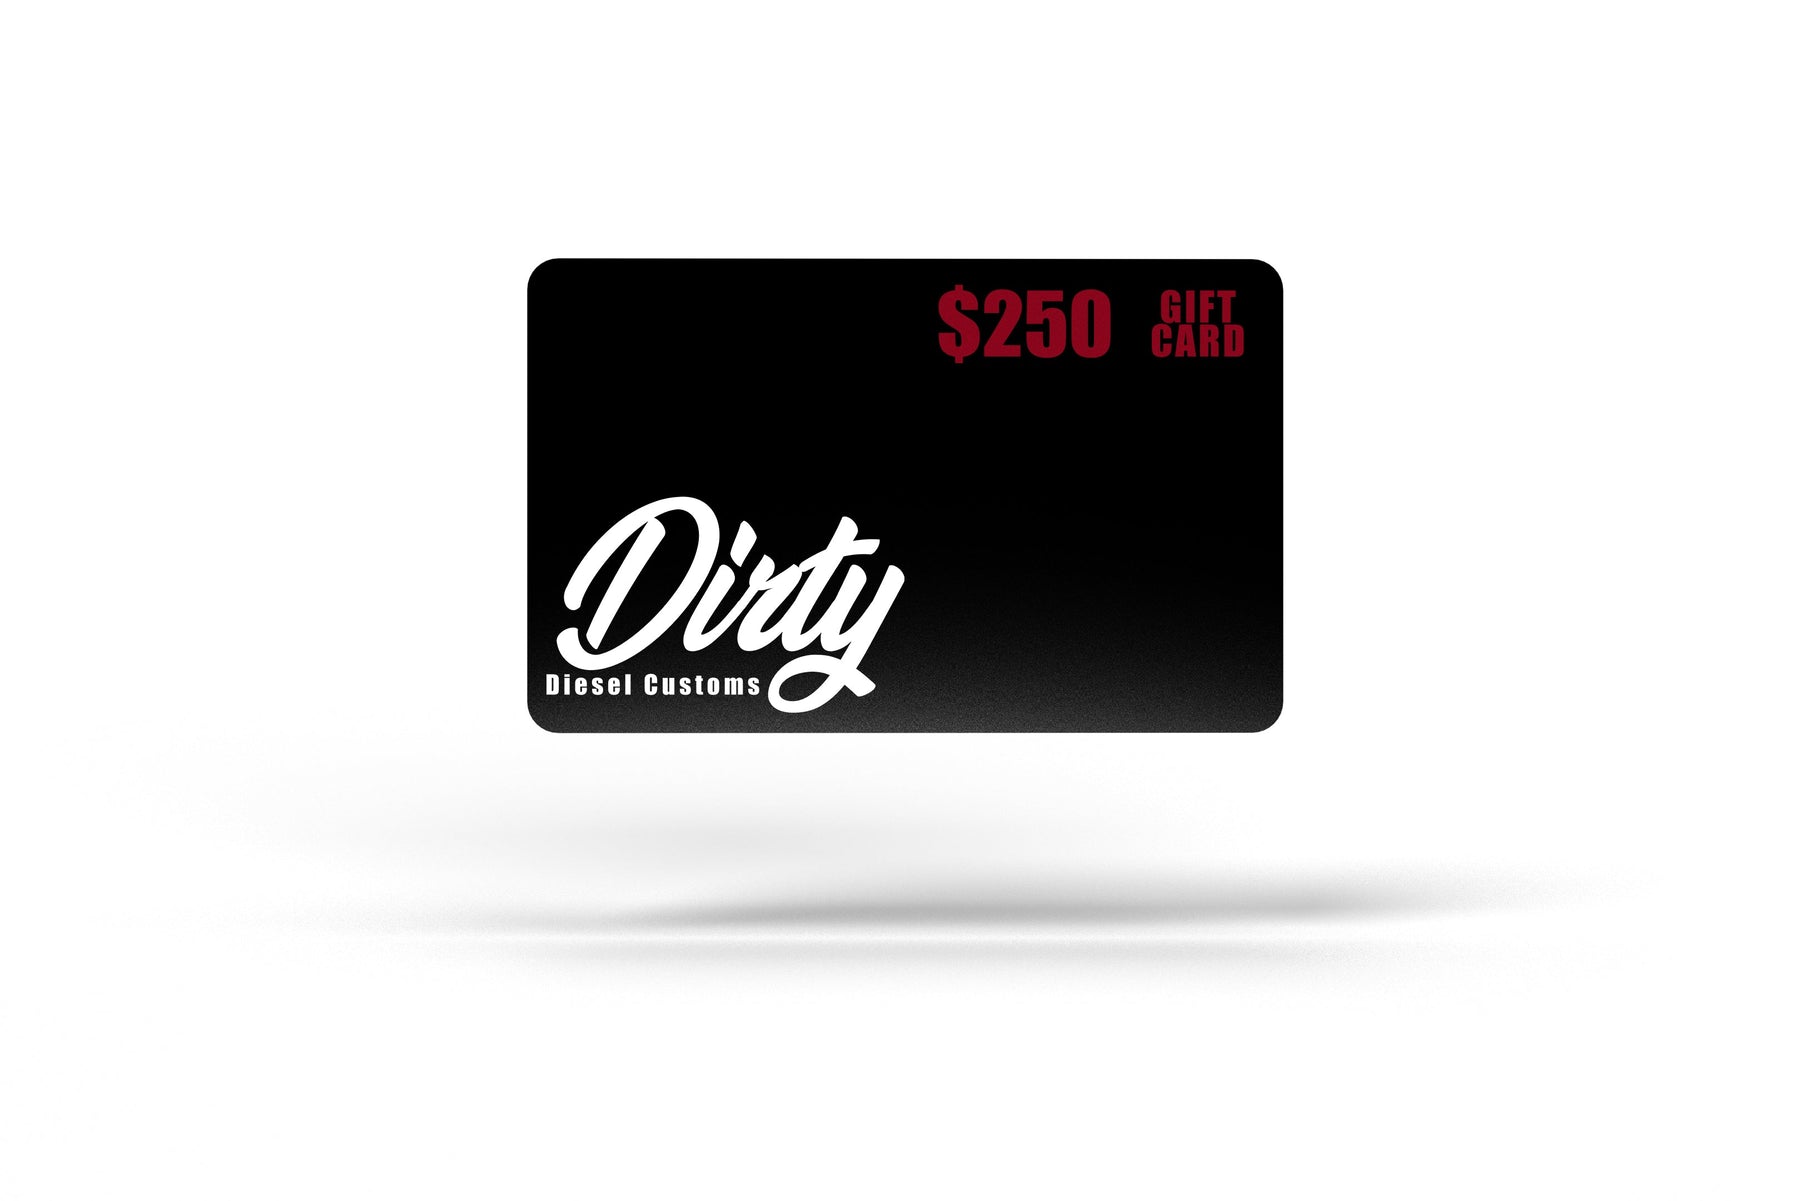 Dirty Diesel Customs Gift Card-Gift Cards-Dirty Diesel Customs-DDC-GC-250-Dirty Diesel Customs